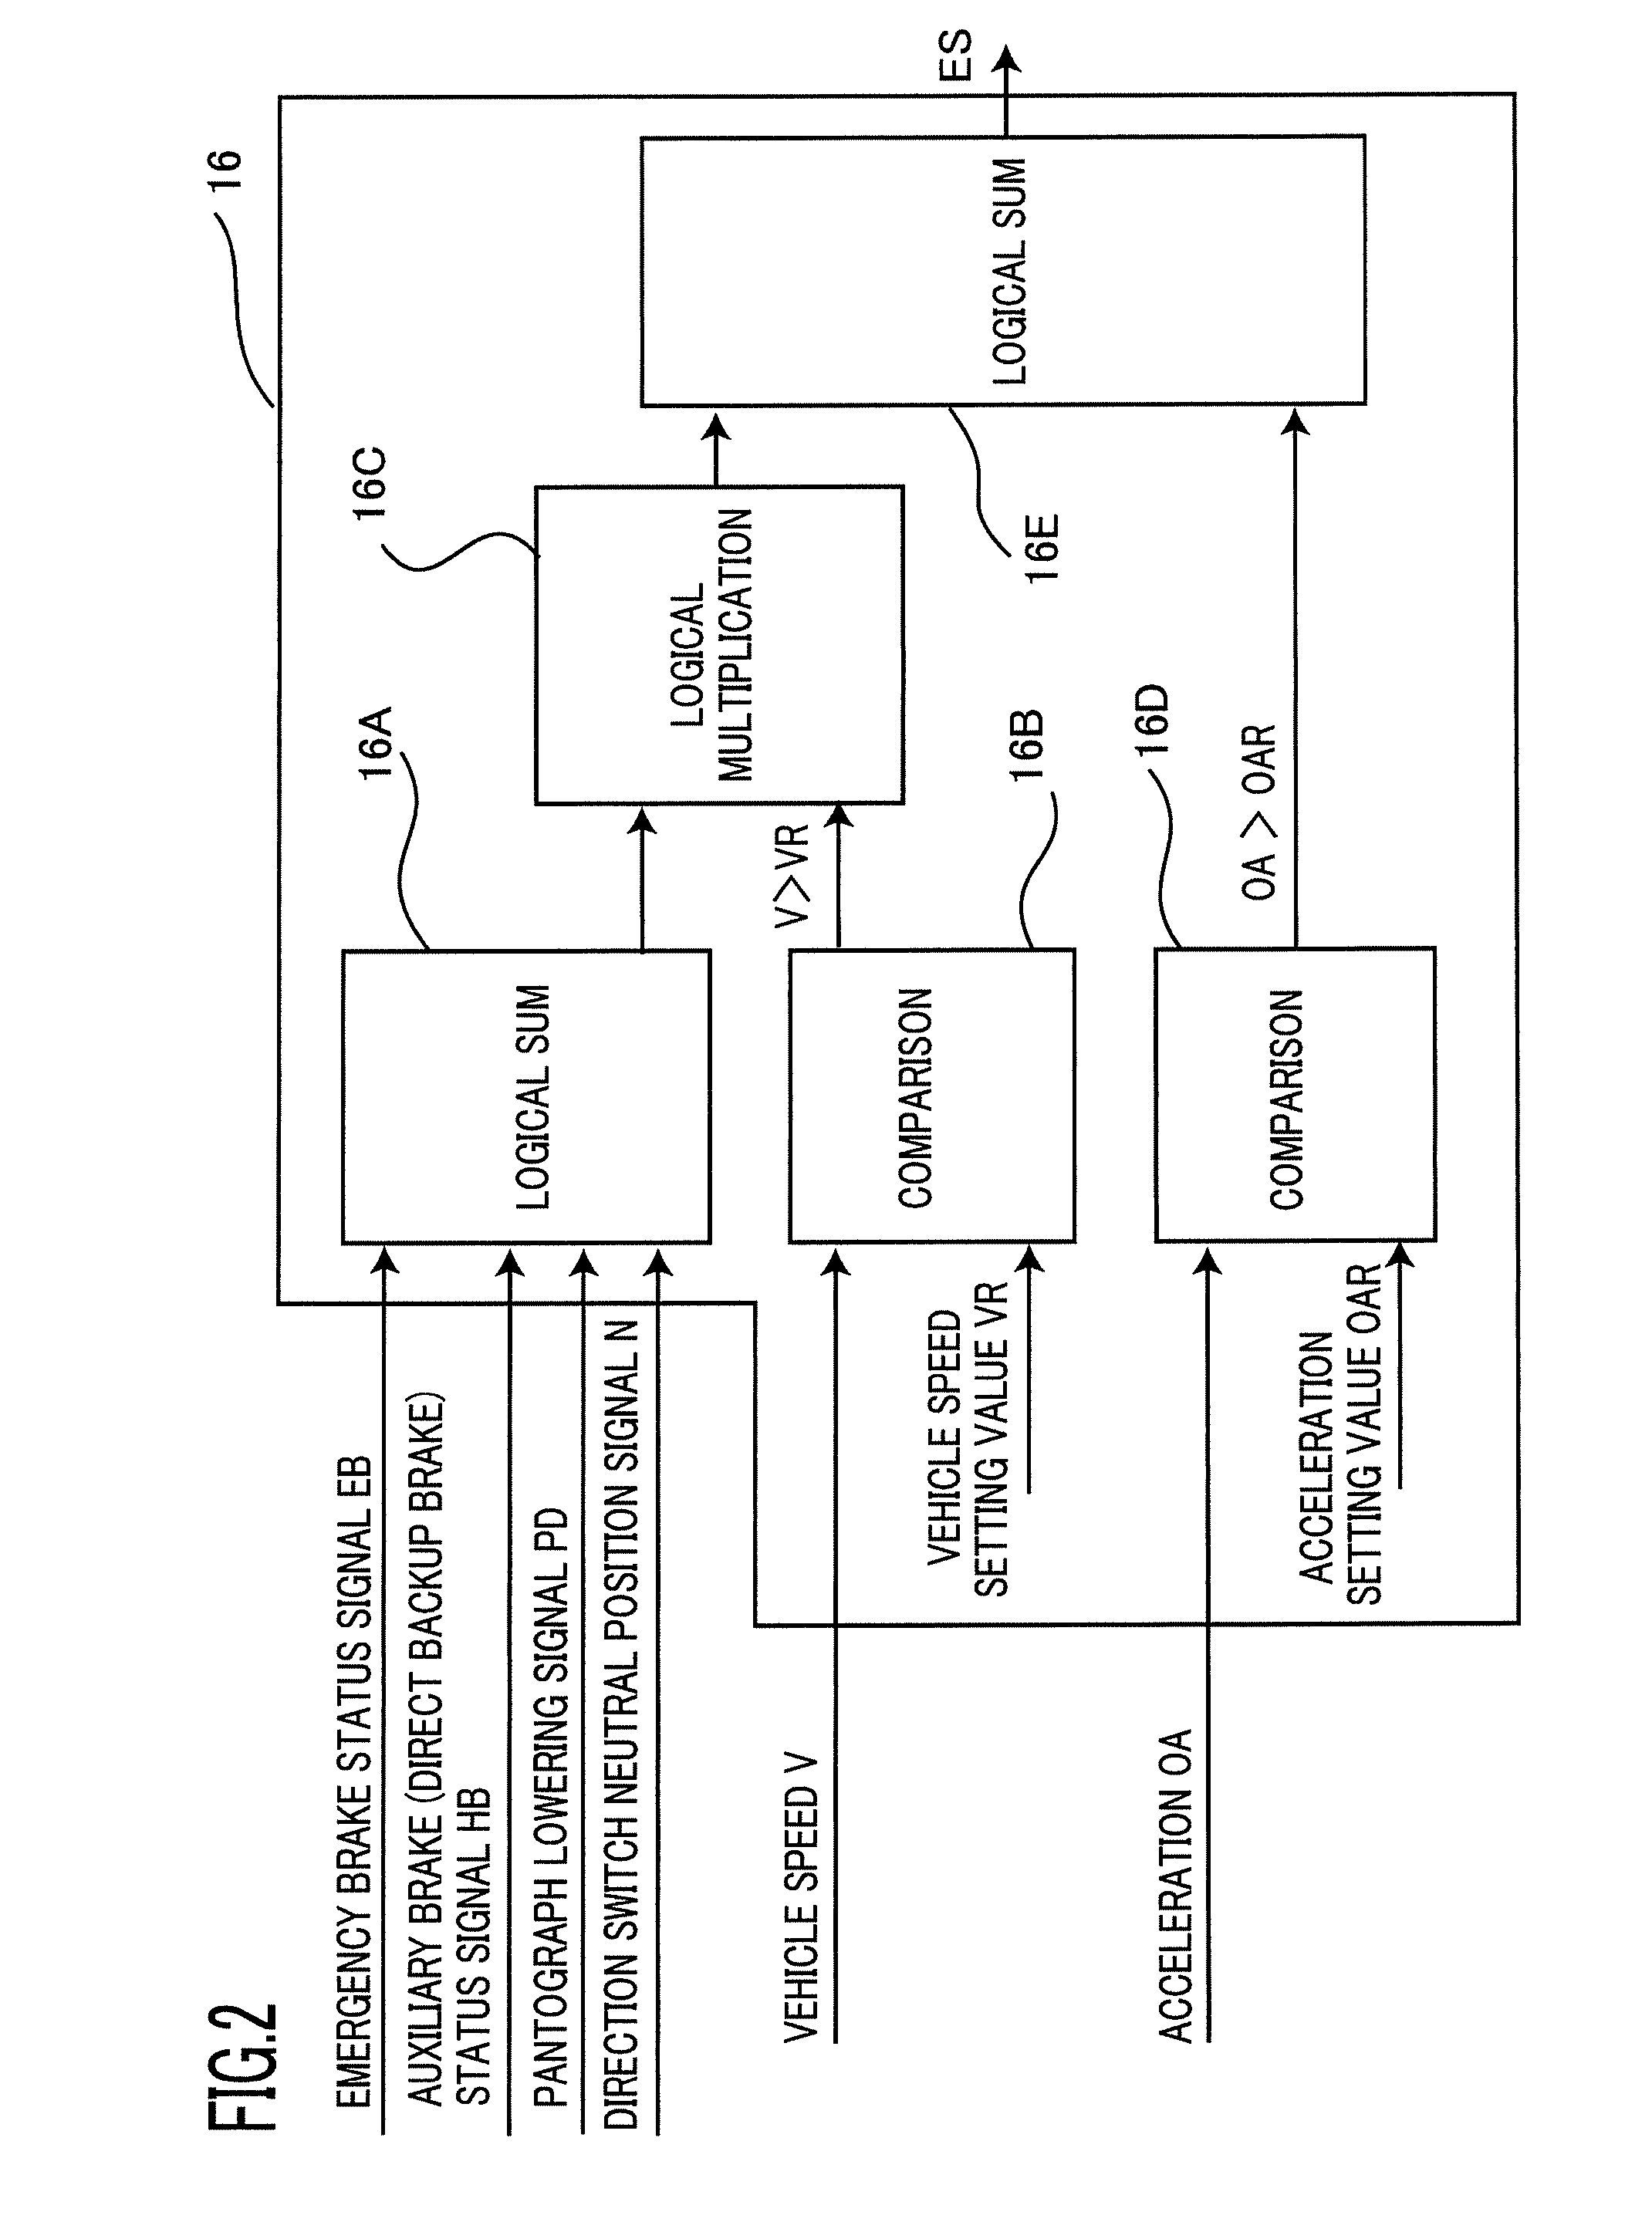 Electric-vehicle controller